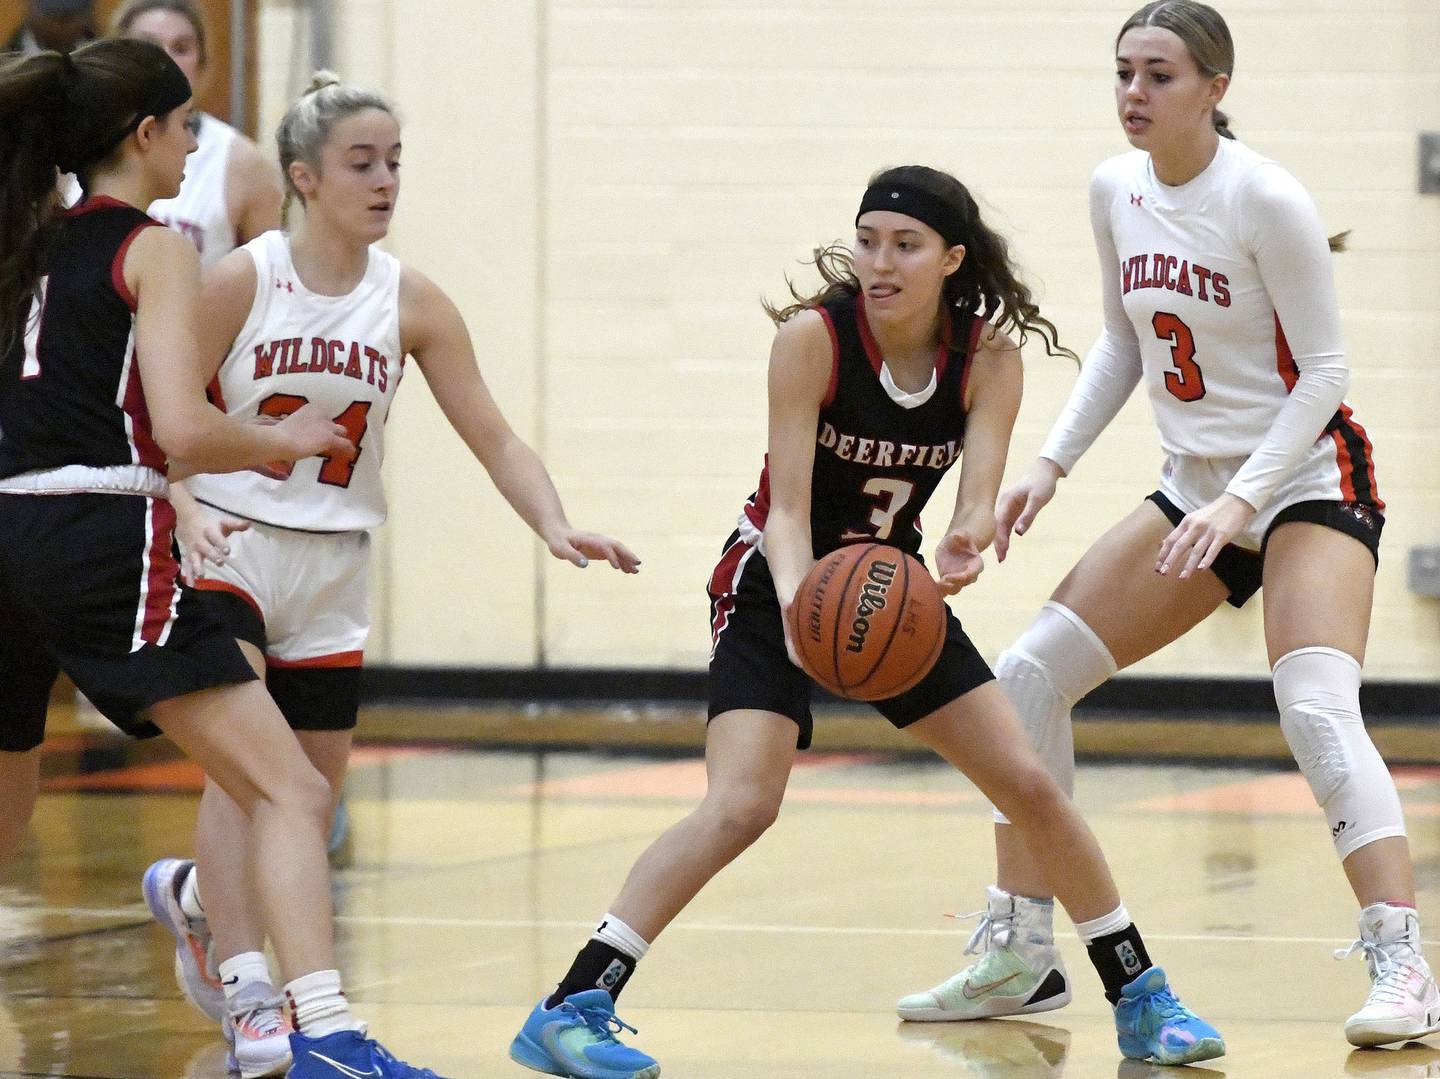 Deerfield’s Aubrey Galvan, second from right, tries to flip the ball to teammate Nikki Kerstein, left, as Libertyville’s Kate Rule, second from left, and Emily Fisher defend during a game in Libertyville on Saturday, Dec. 10, 2022. 